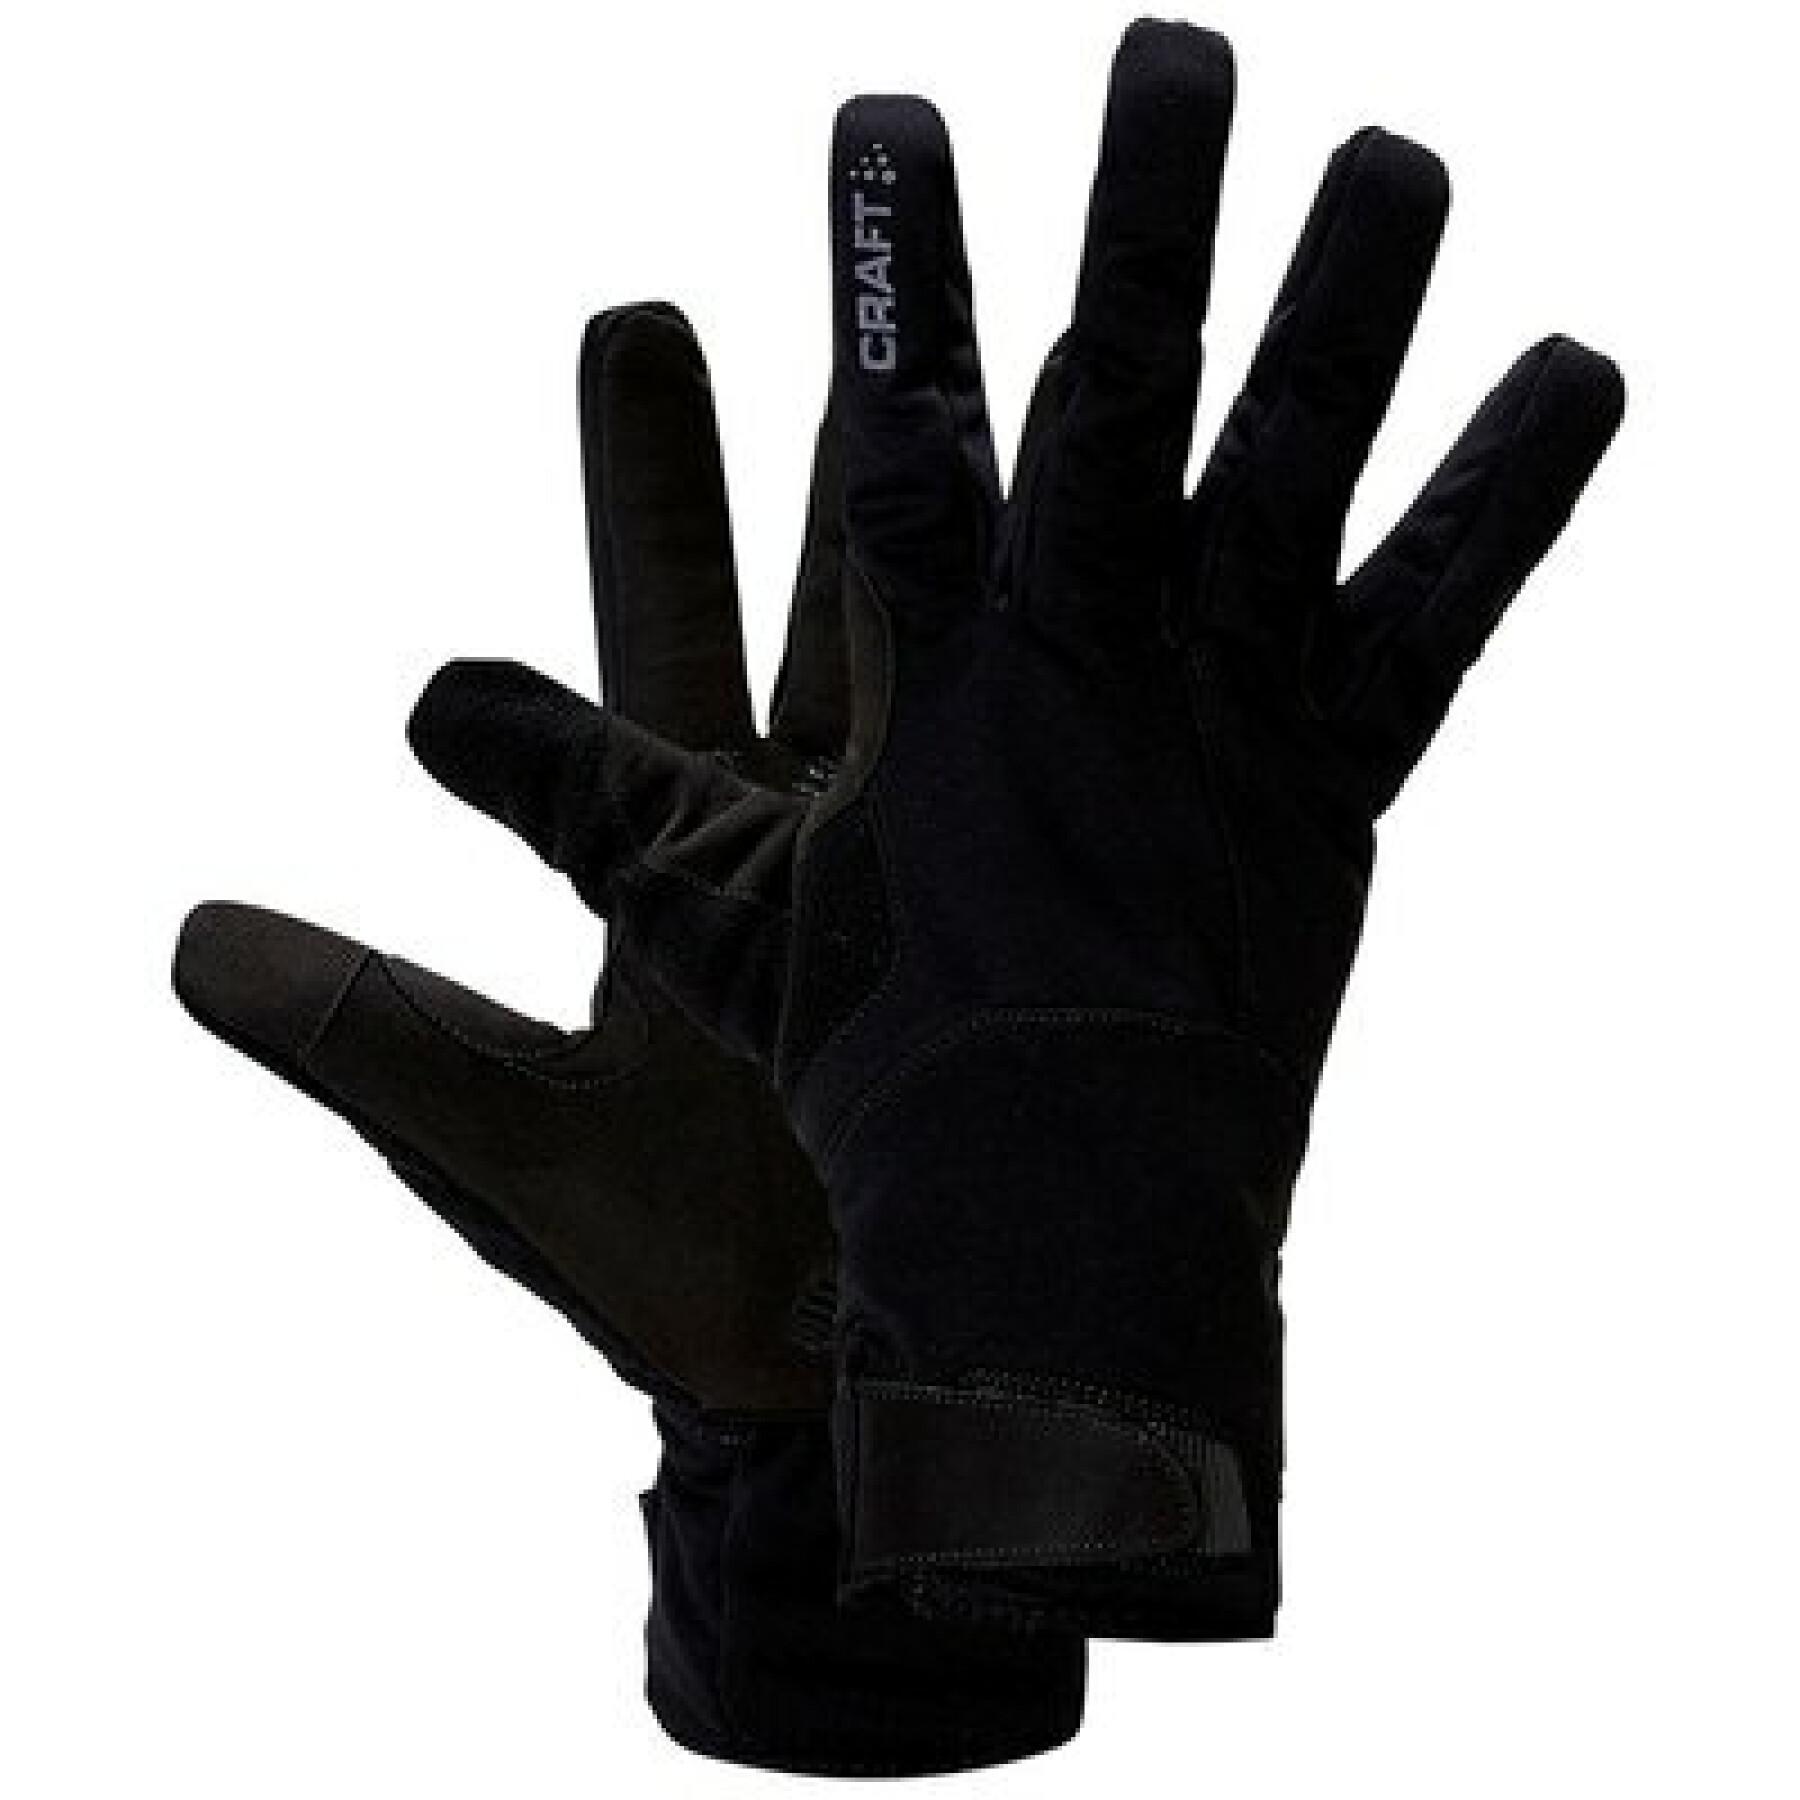 Gloves Craft pro insulate race